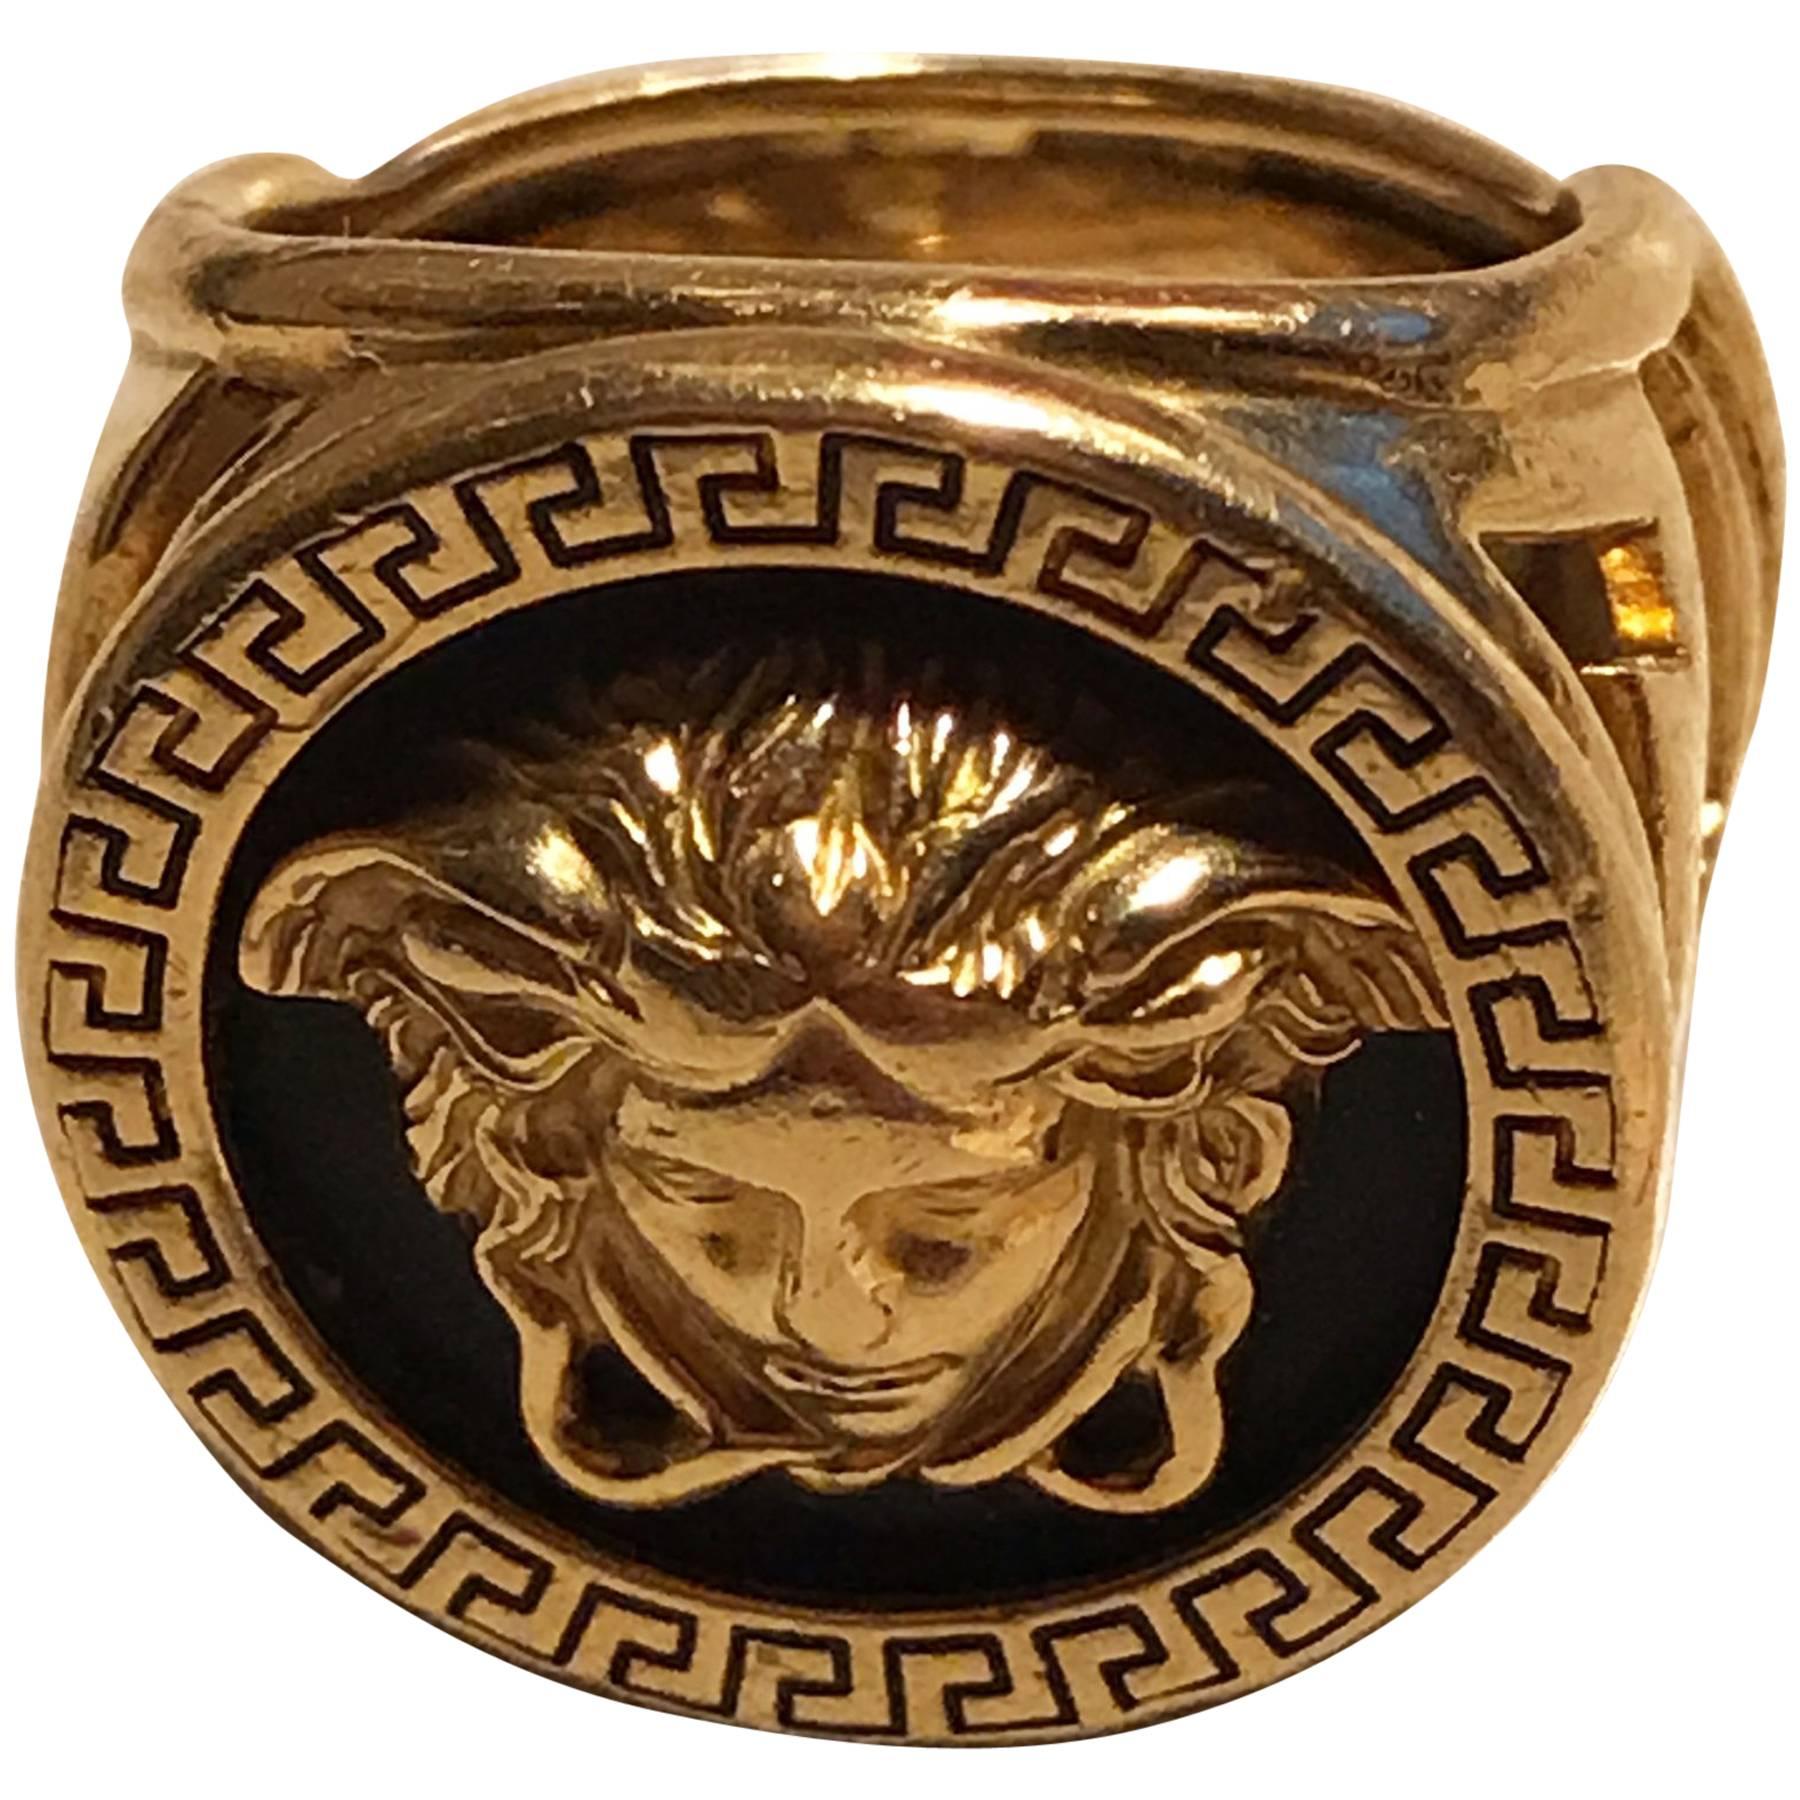 Gianni Versace Gold Ring - 7 For Sale on 1stDibs | versace gold ring 18k, versace  gold ring 18k price, 18k versace ring